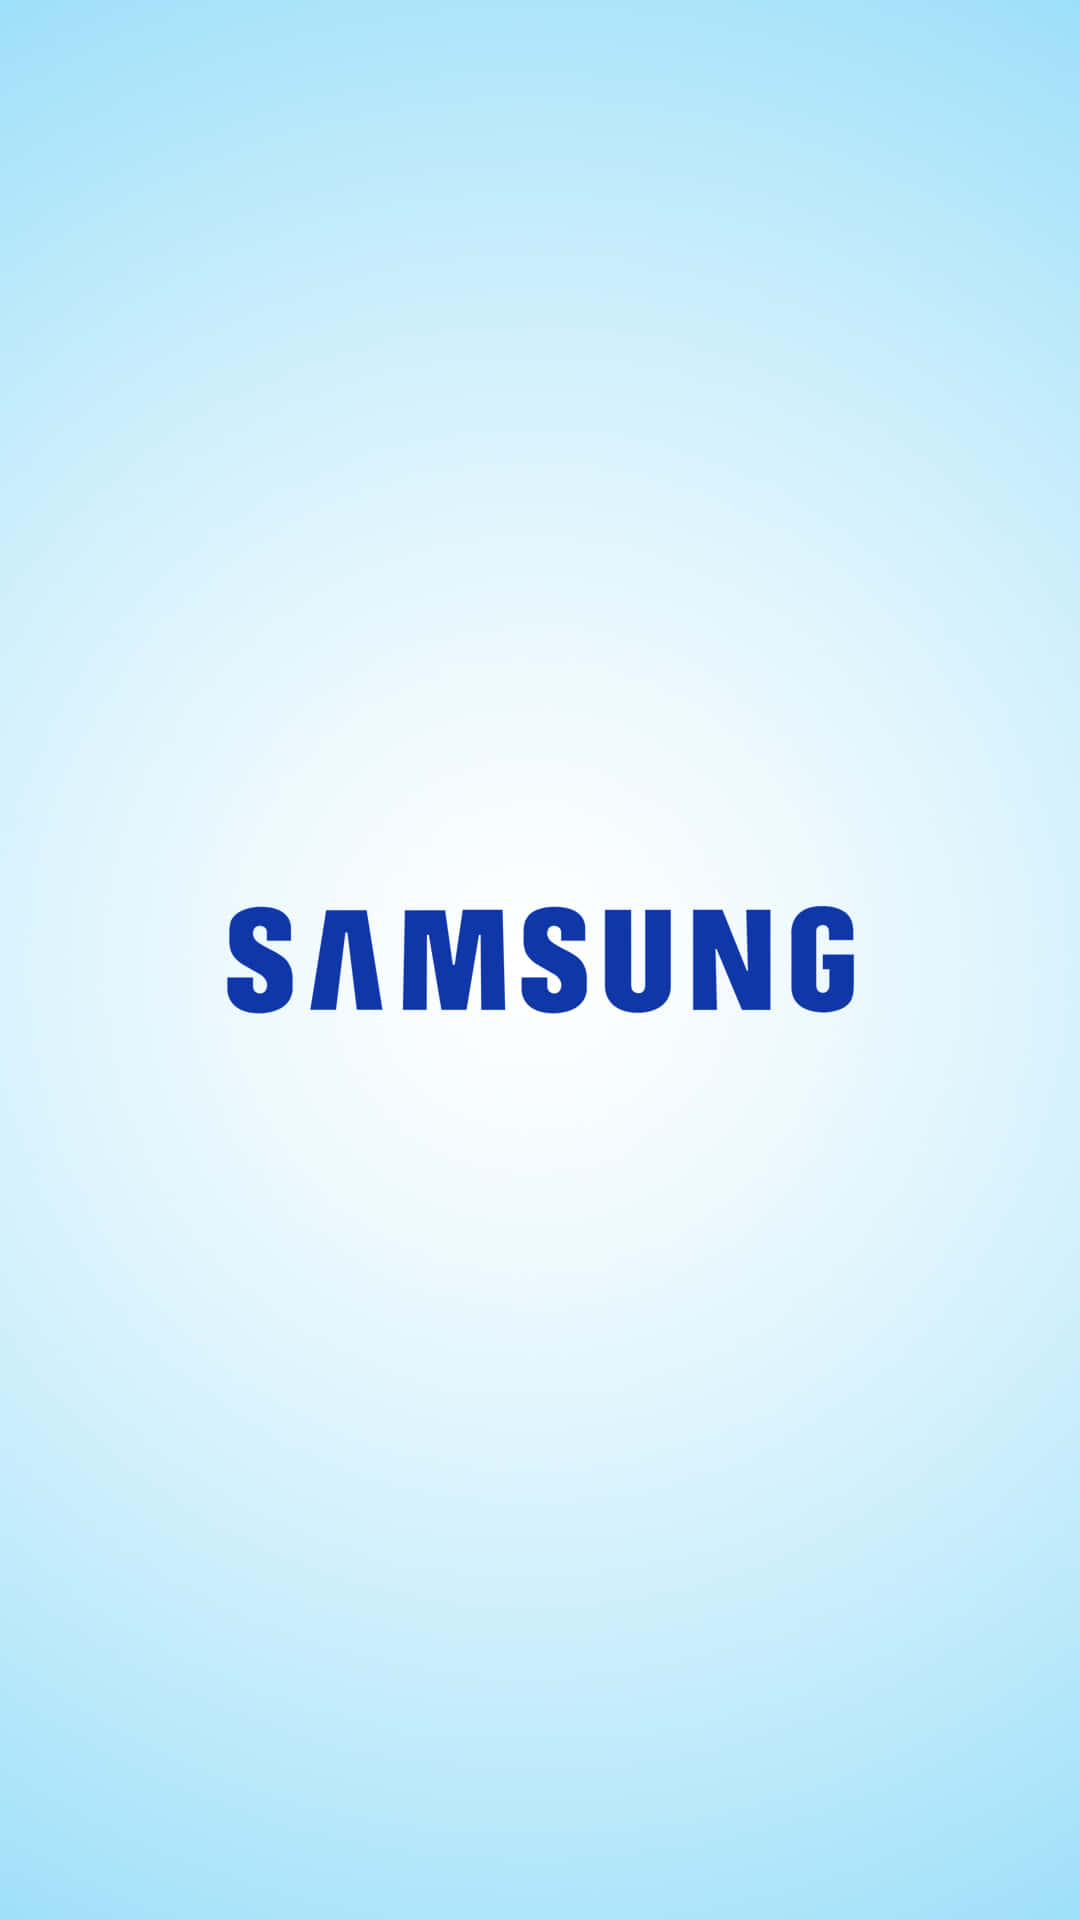 Get futuristic with Samsung - tapping into advanced technology today